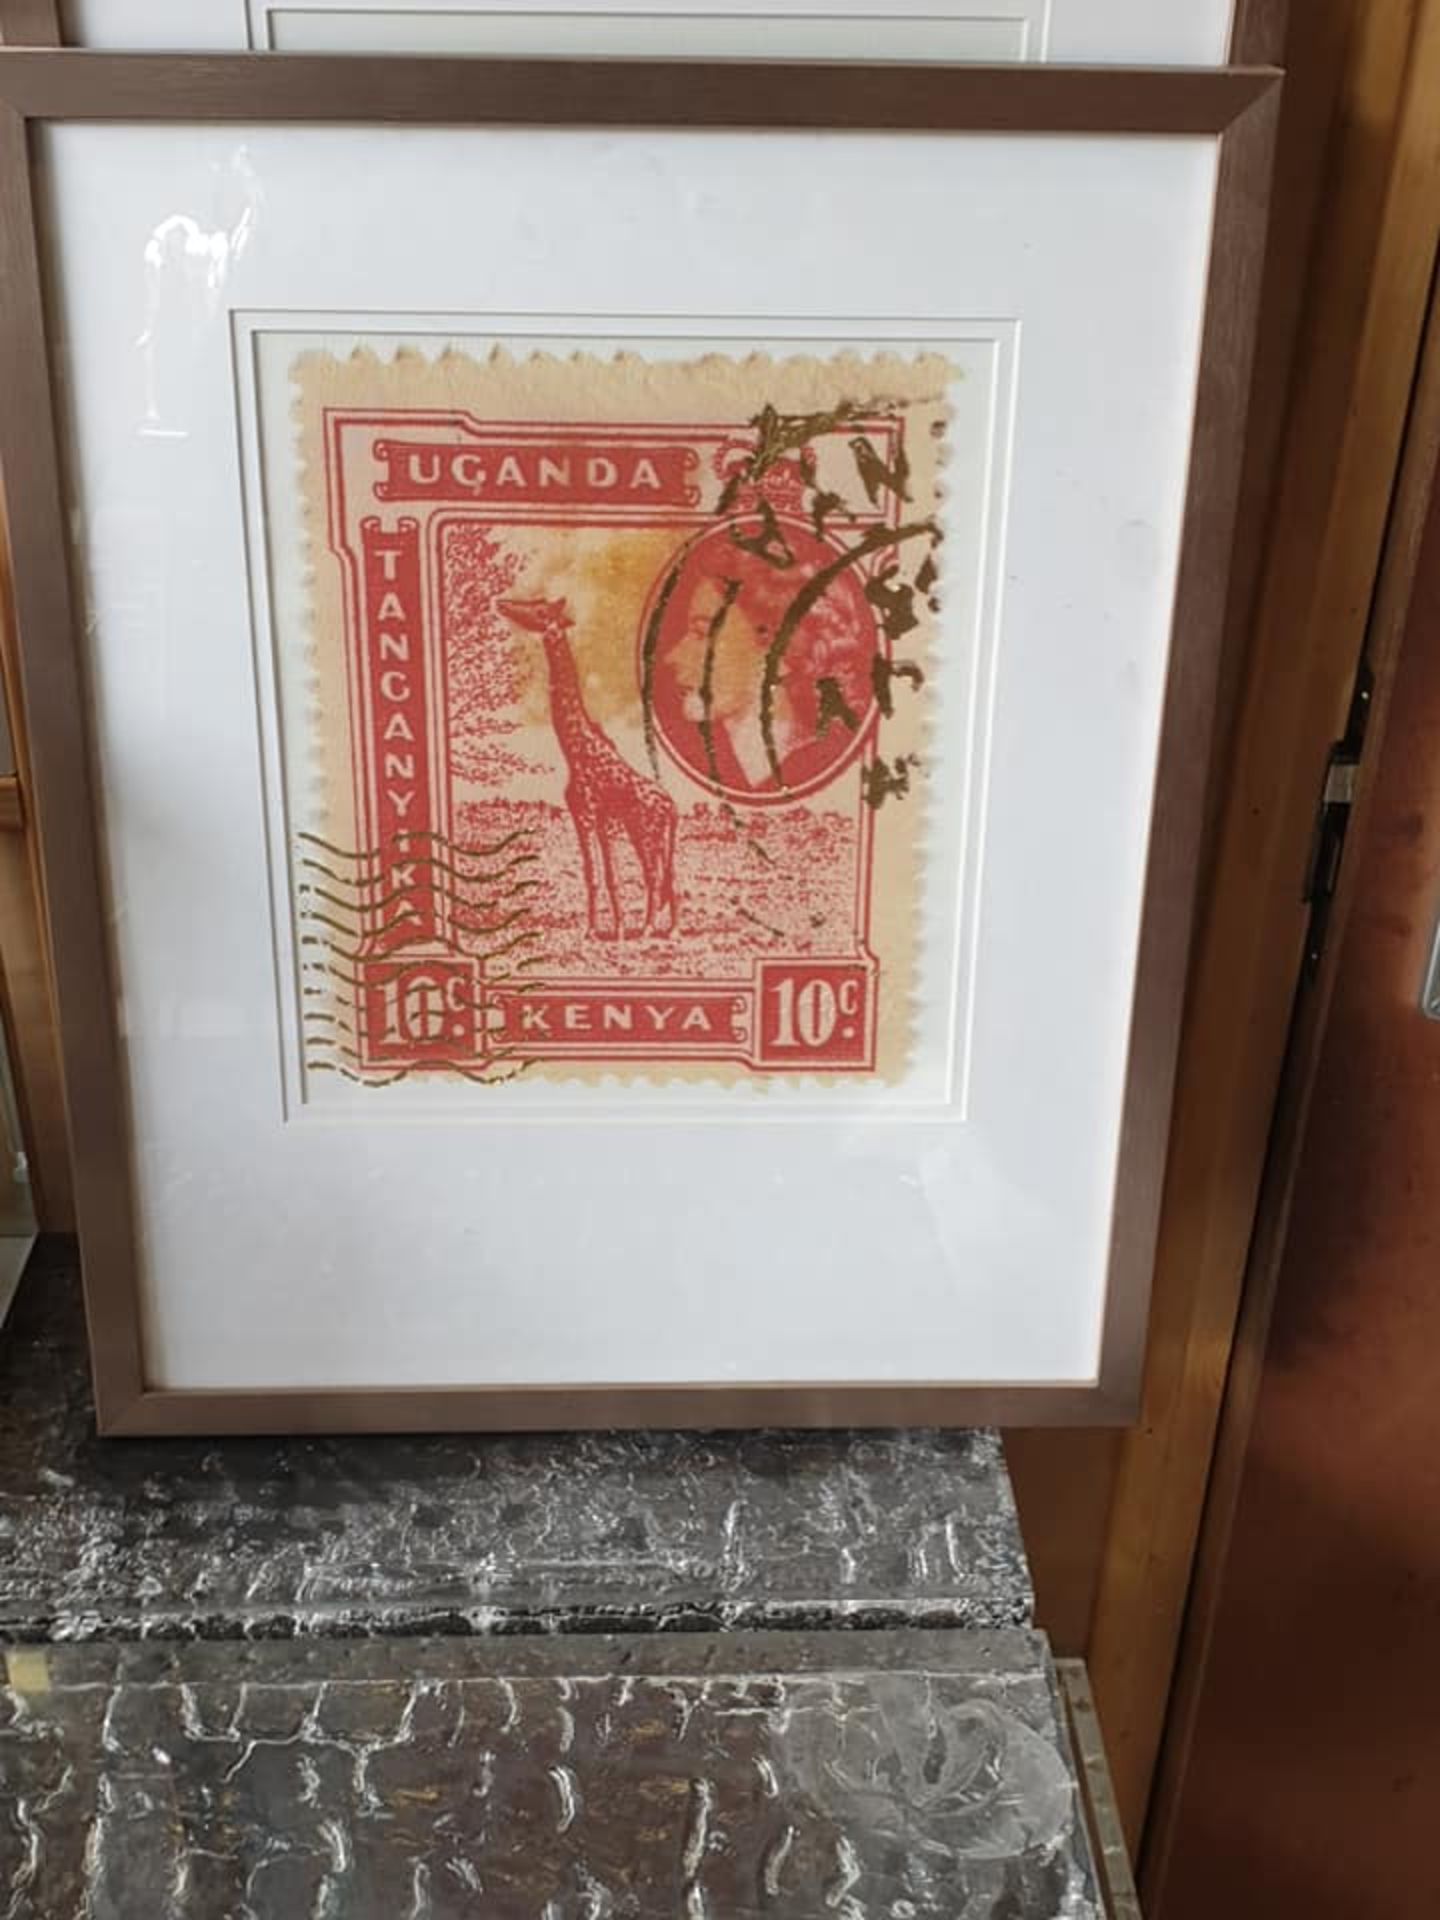 Artwork Framed Graphic Art Print -The Enlarged Print Of An Antique Postage Stamp From Uganda